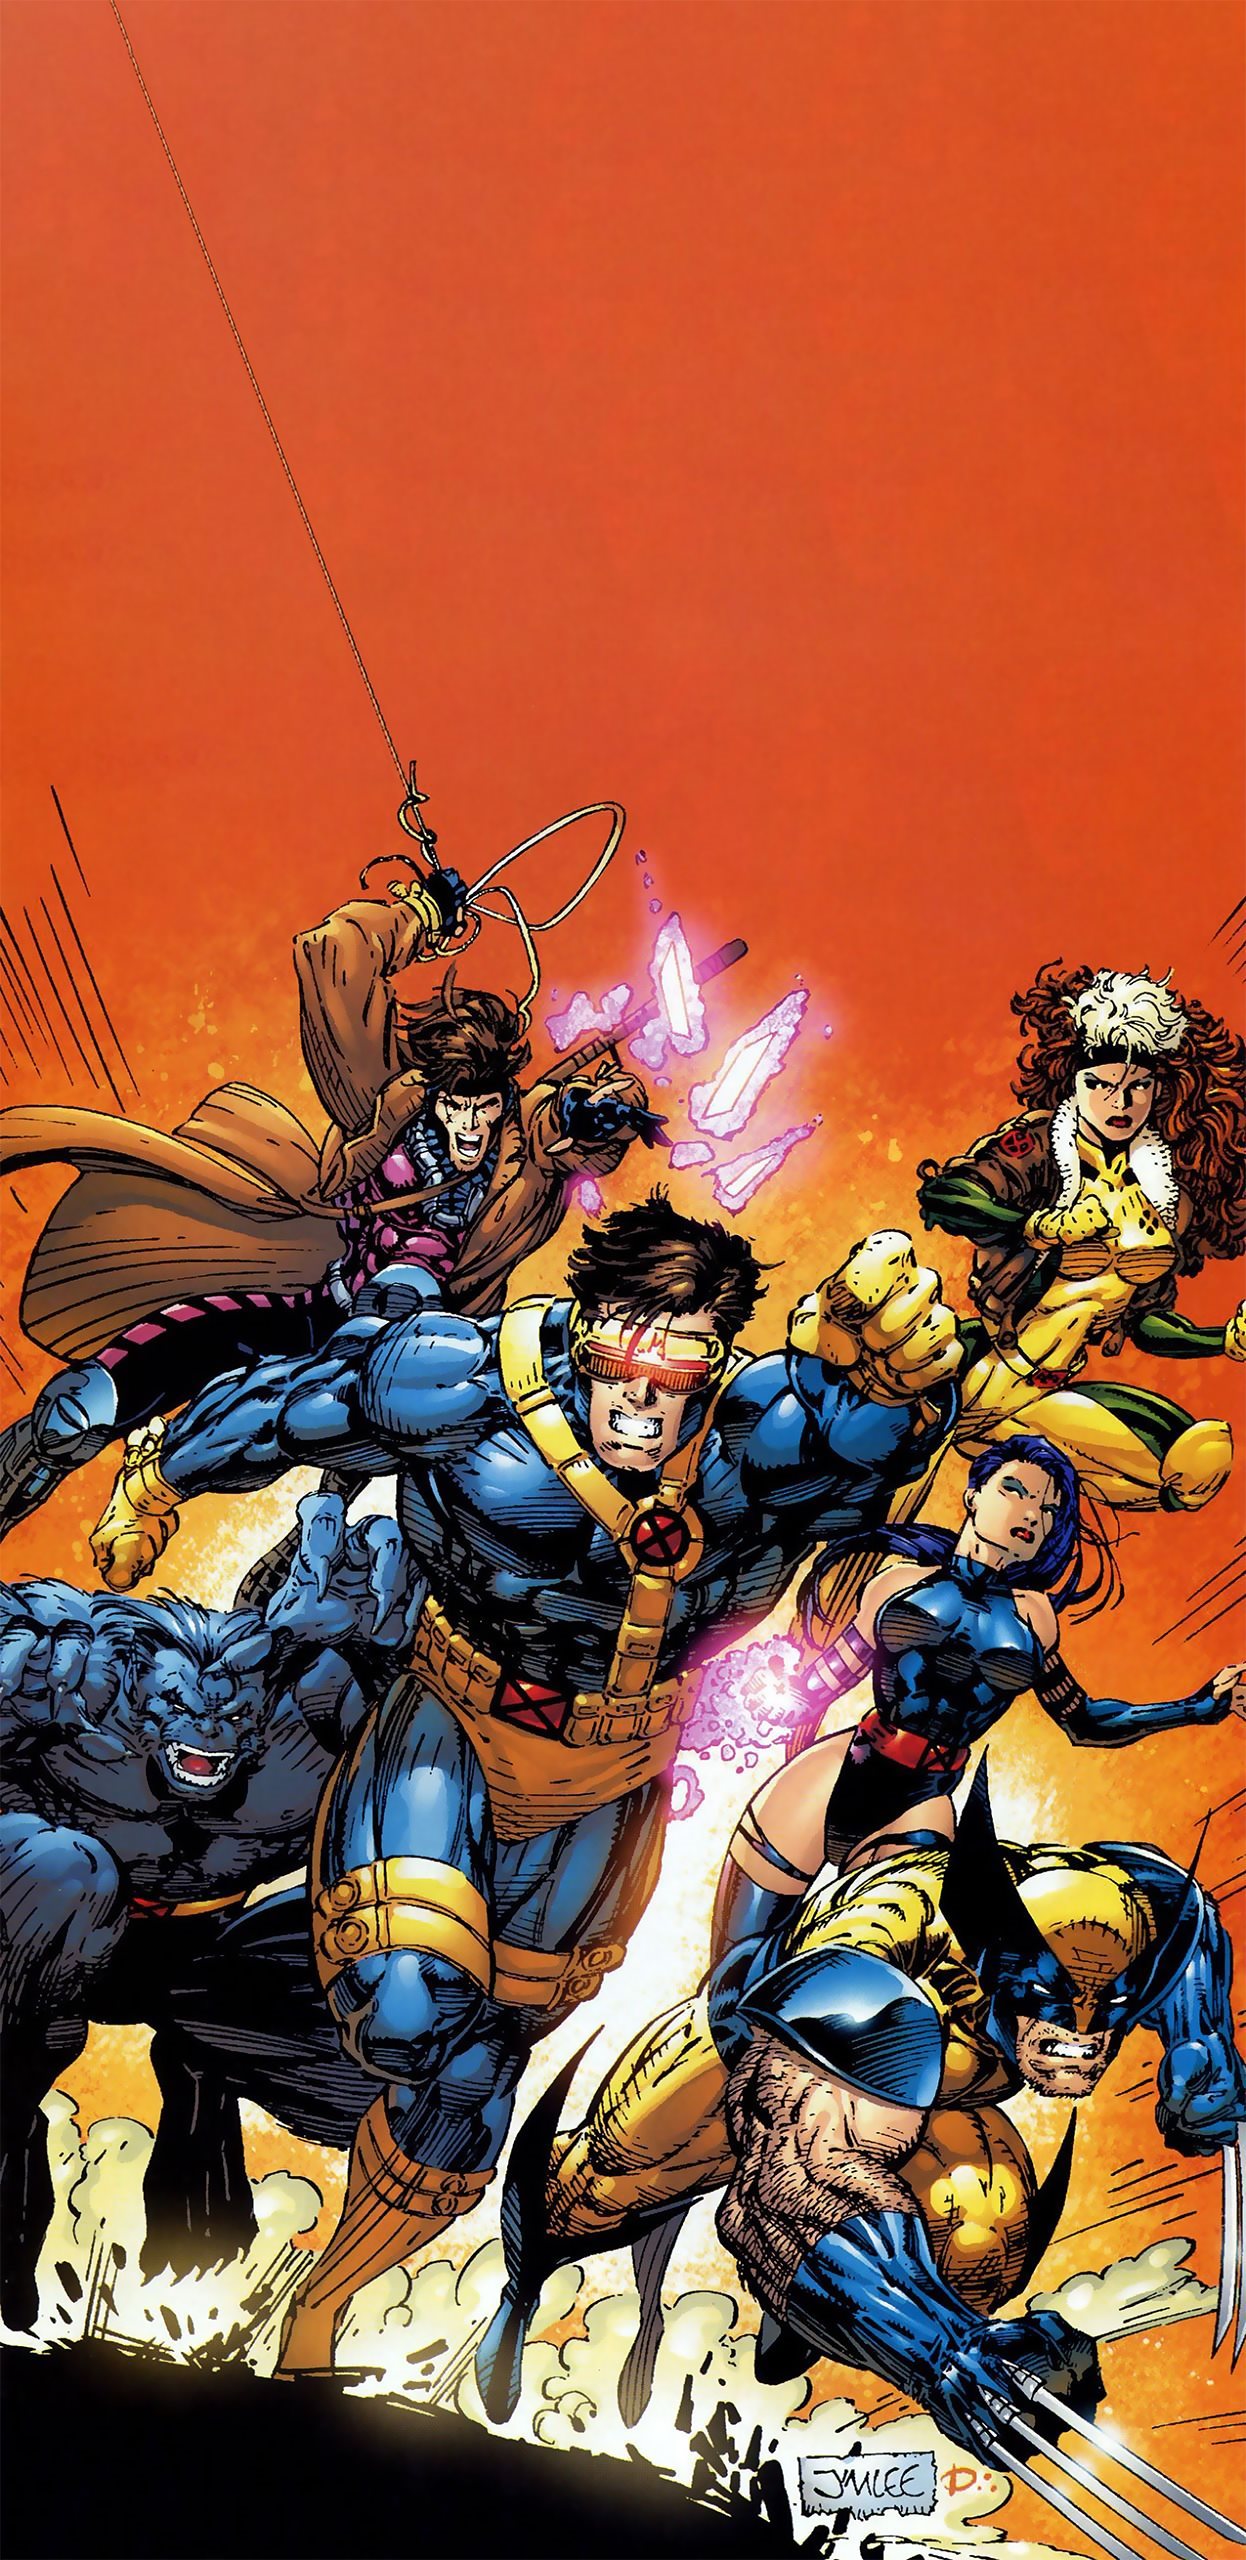 g89f9n-X-Men_poster__from_Shattershot_annual__by_Jim_Lee__mobile_expanded___1246x2560_-18EJdml.jpg